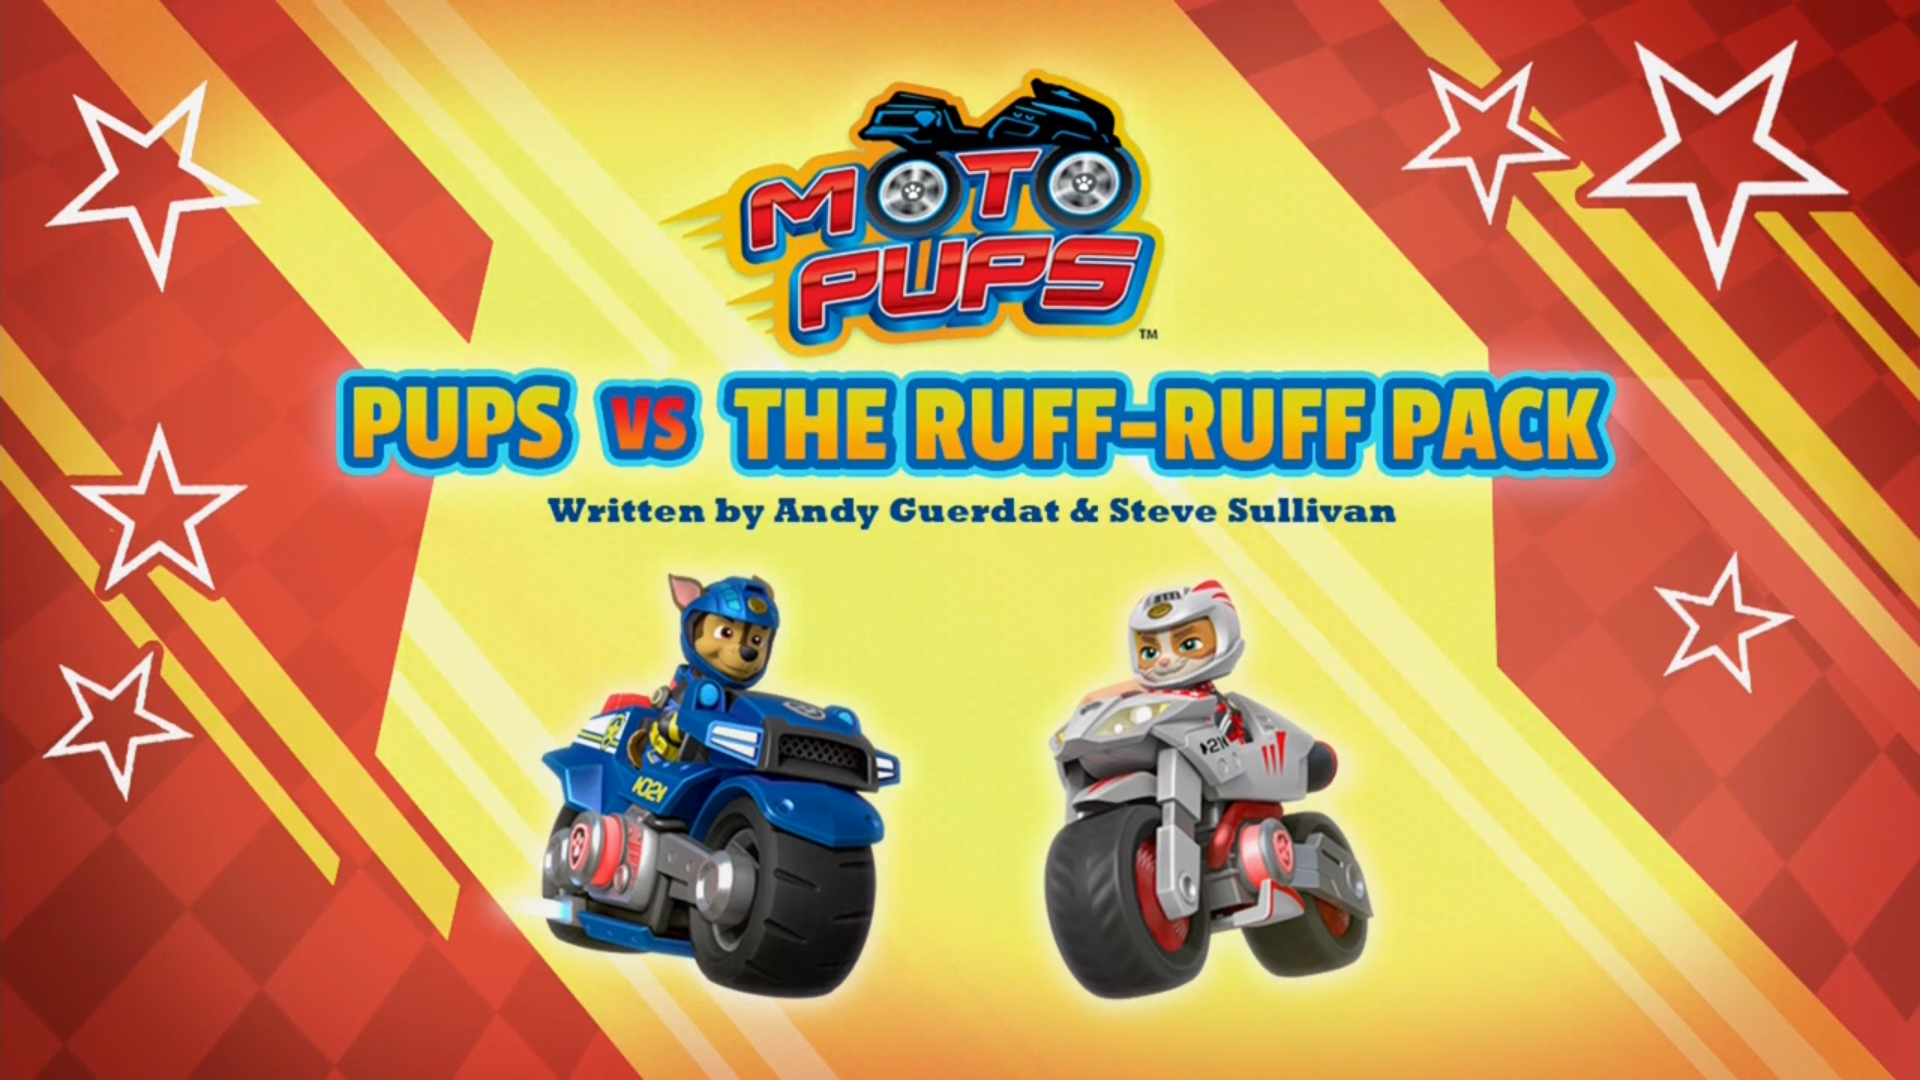 https://static.wikia.nocookie.net/paw-patrol/images/2/20/Pups_vs_The_Ruff-Ruff_Pack.png/revision/latest?cb=20210115170307